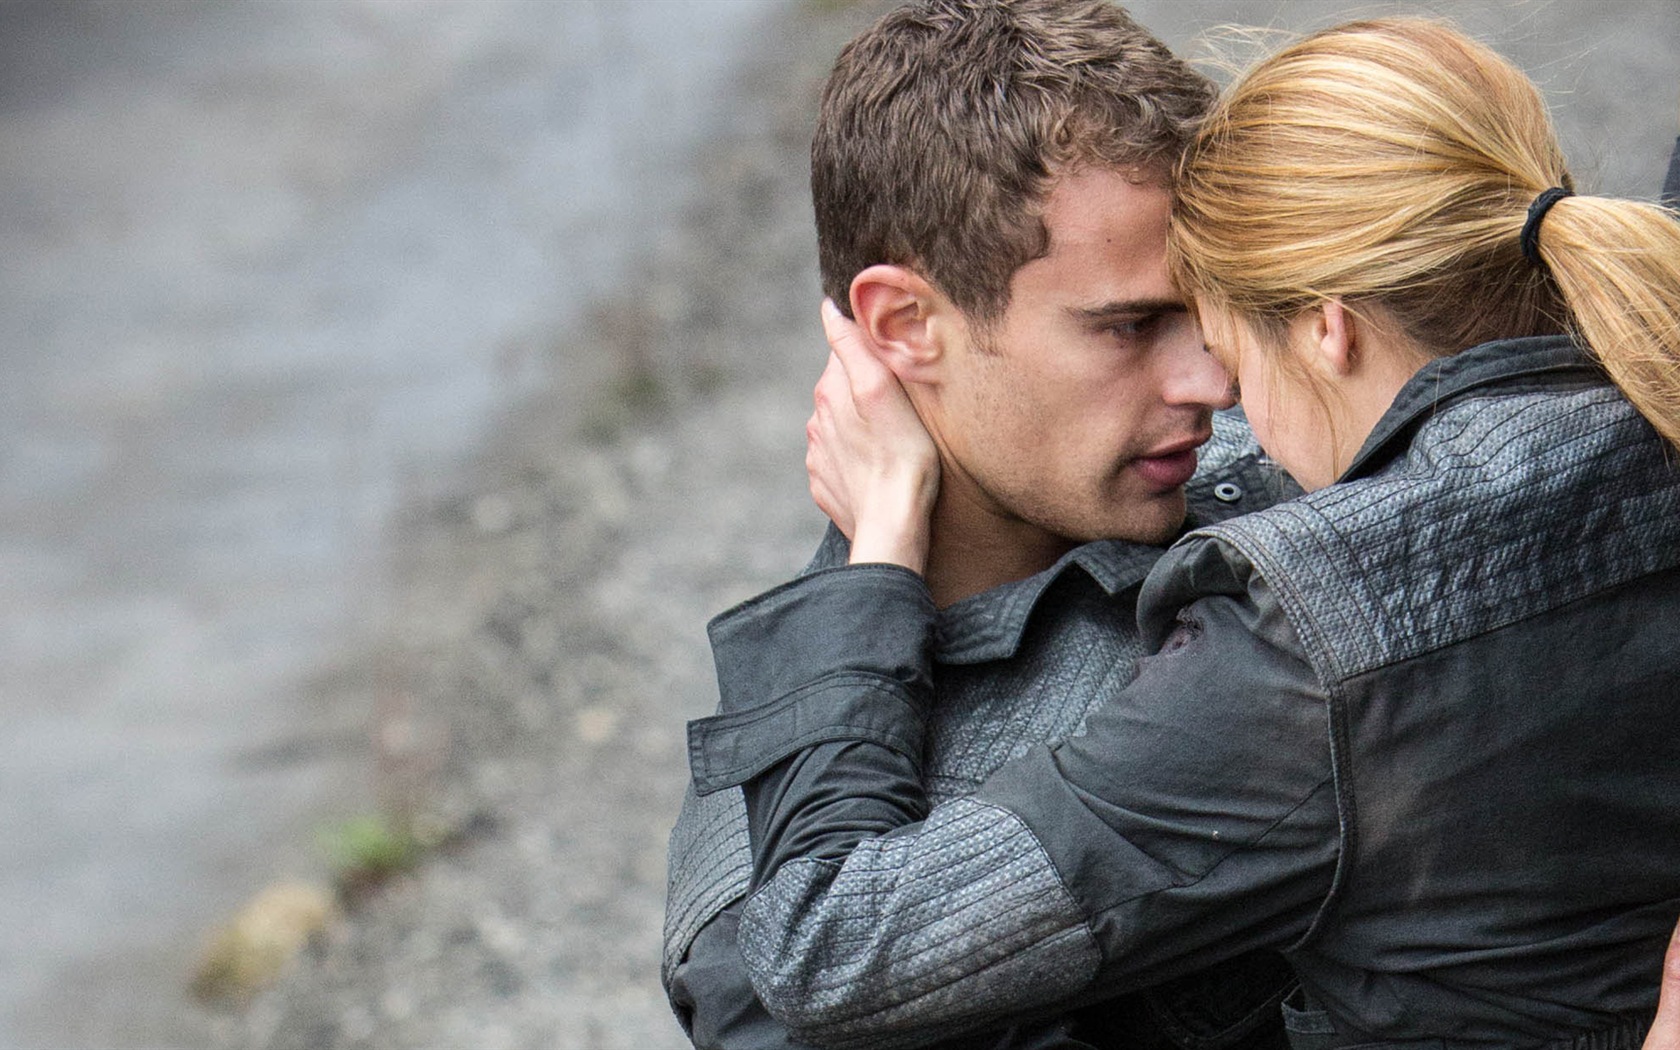 Divergent movie HD wallpapers #12 - 1680x1050